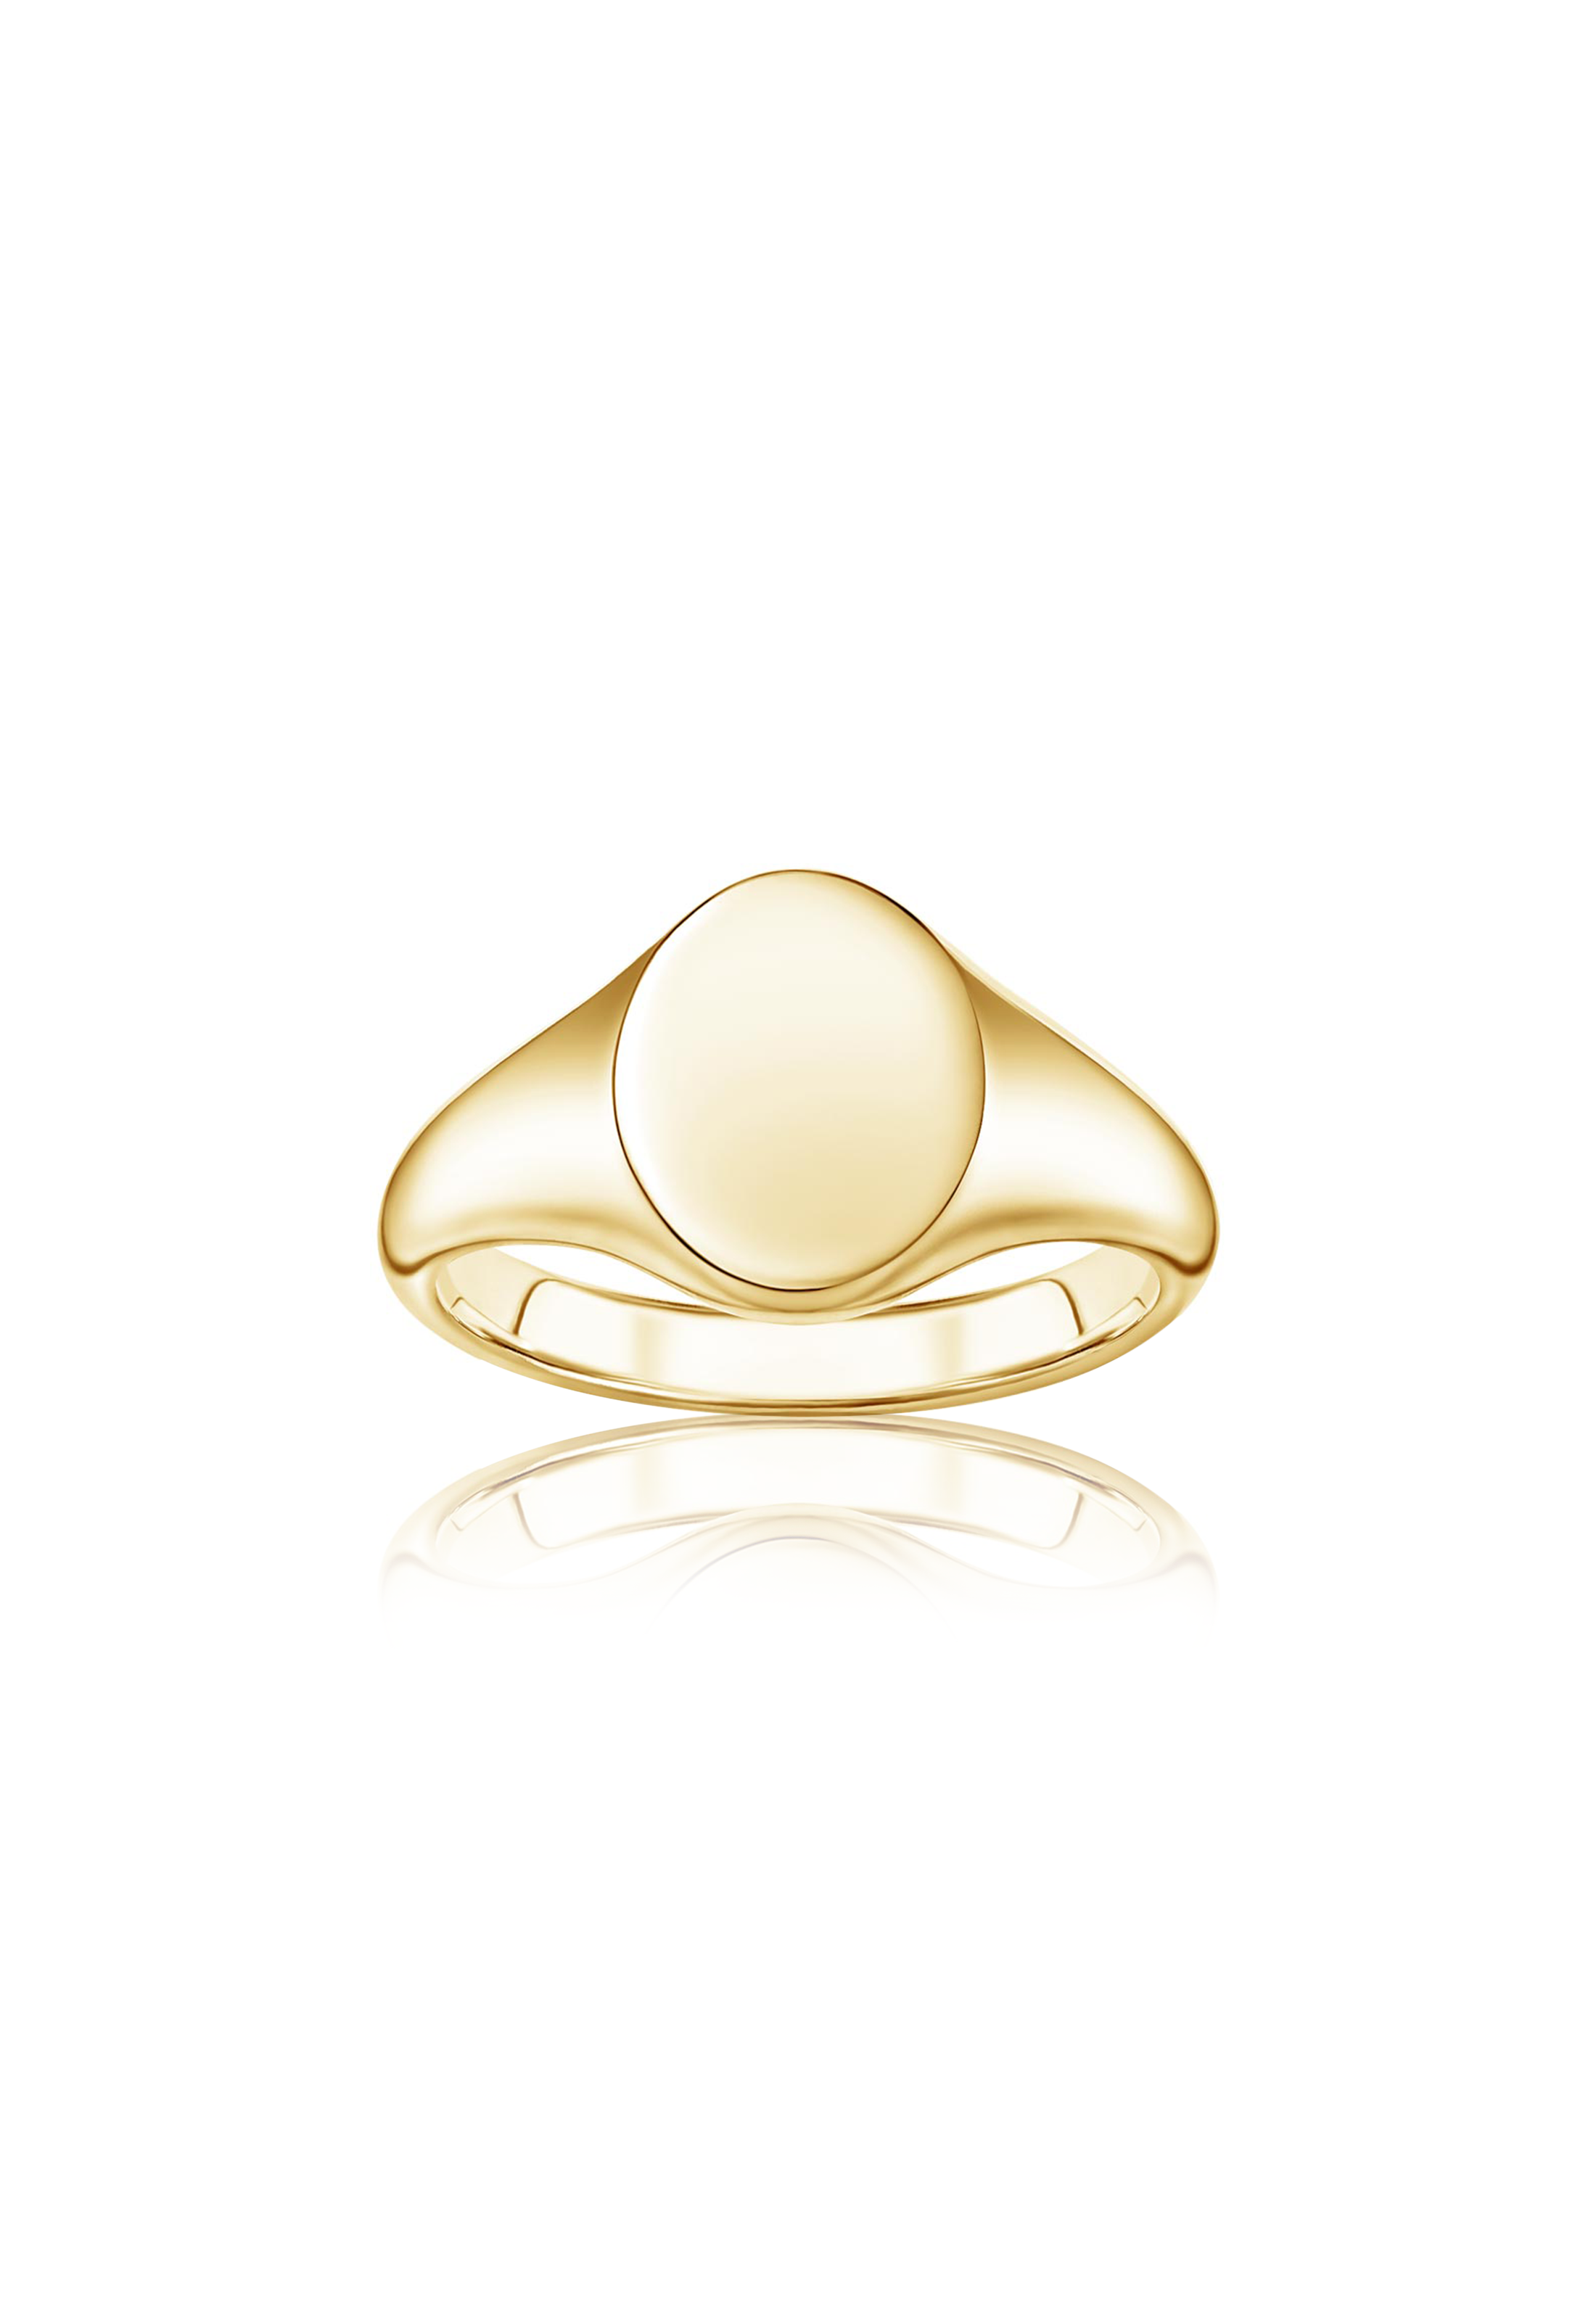 Solid Gold Signet Ring - Fenom & Co.